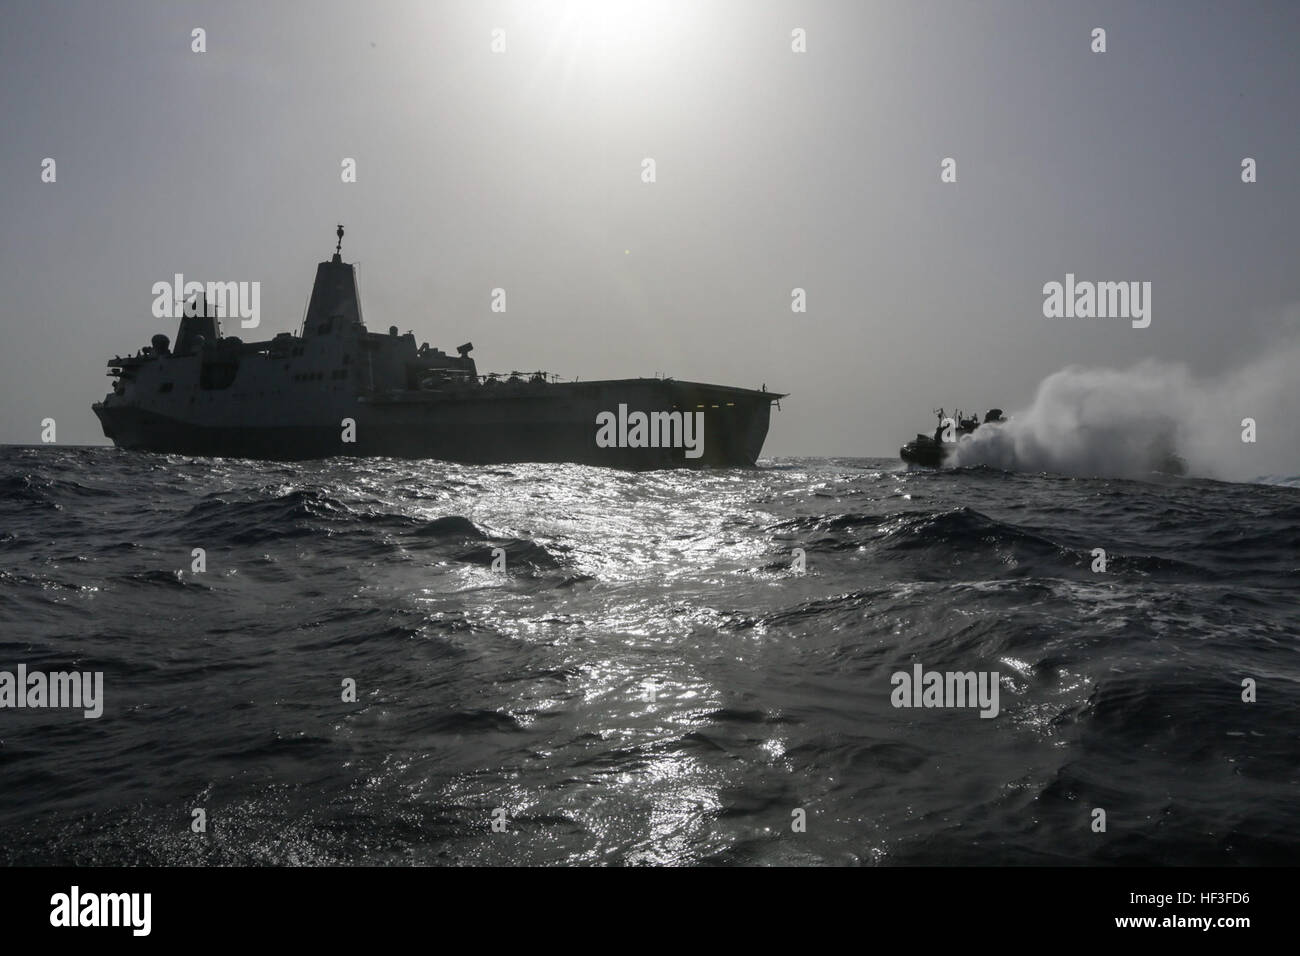 ARABIAN SEA (July 2, 2015) A landing craft, air cushion approaches the stern gate of the amphibious transport dock USS Anchorage (LPD 23). The Anchorage is part of the Essex Amphibious Ready Group and, with the embarked 15th Marine Expeditionary Unit, is deployed in support of maritime security operations and theater security cooperation efforts in the U.S. 5th Fleet area of operations. (U.S. Marine Corps photo by Sgt. Jamean Berry/Released) Anchorage conducts LCAC operations 150702-M-GC438-825 Stock Photo